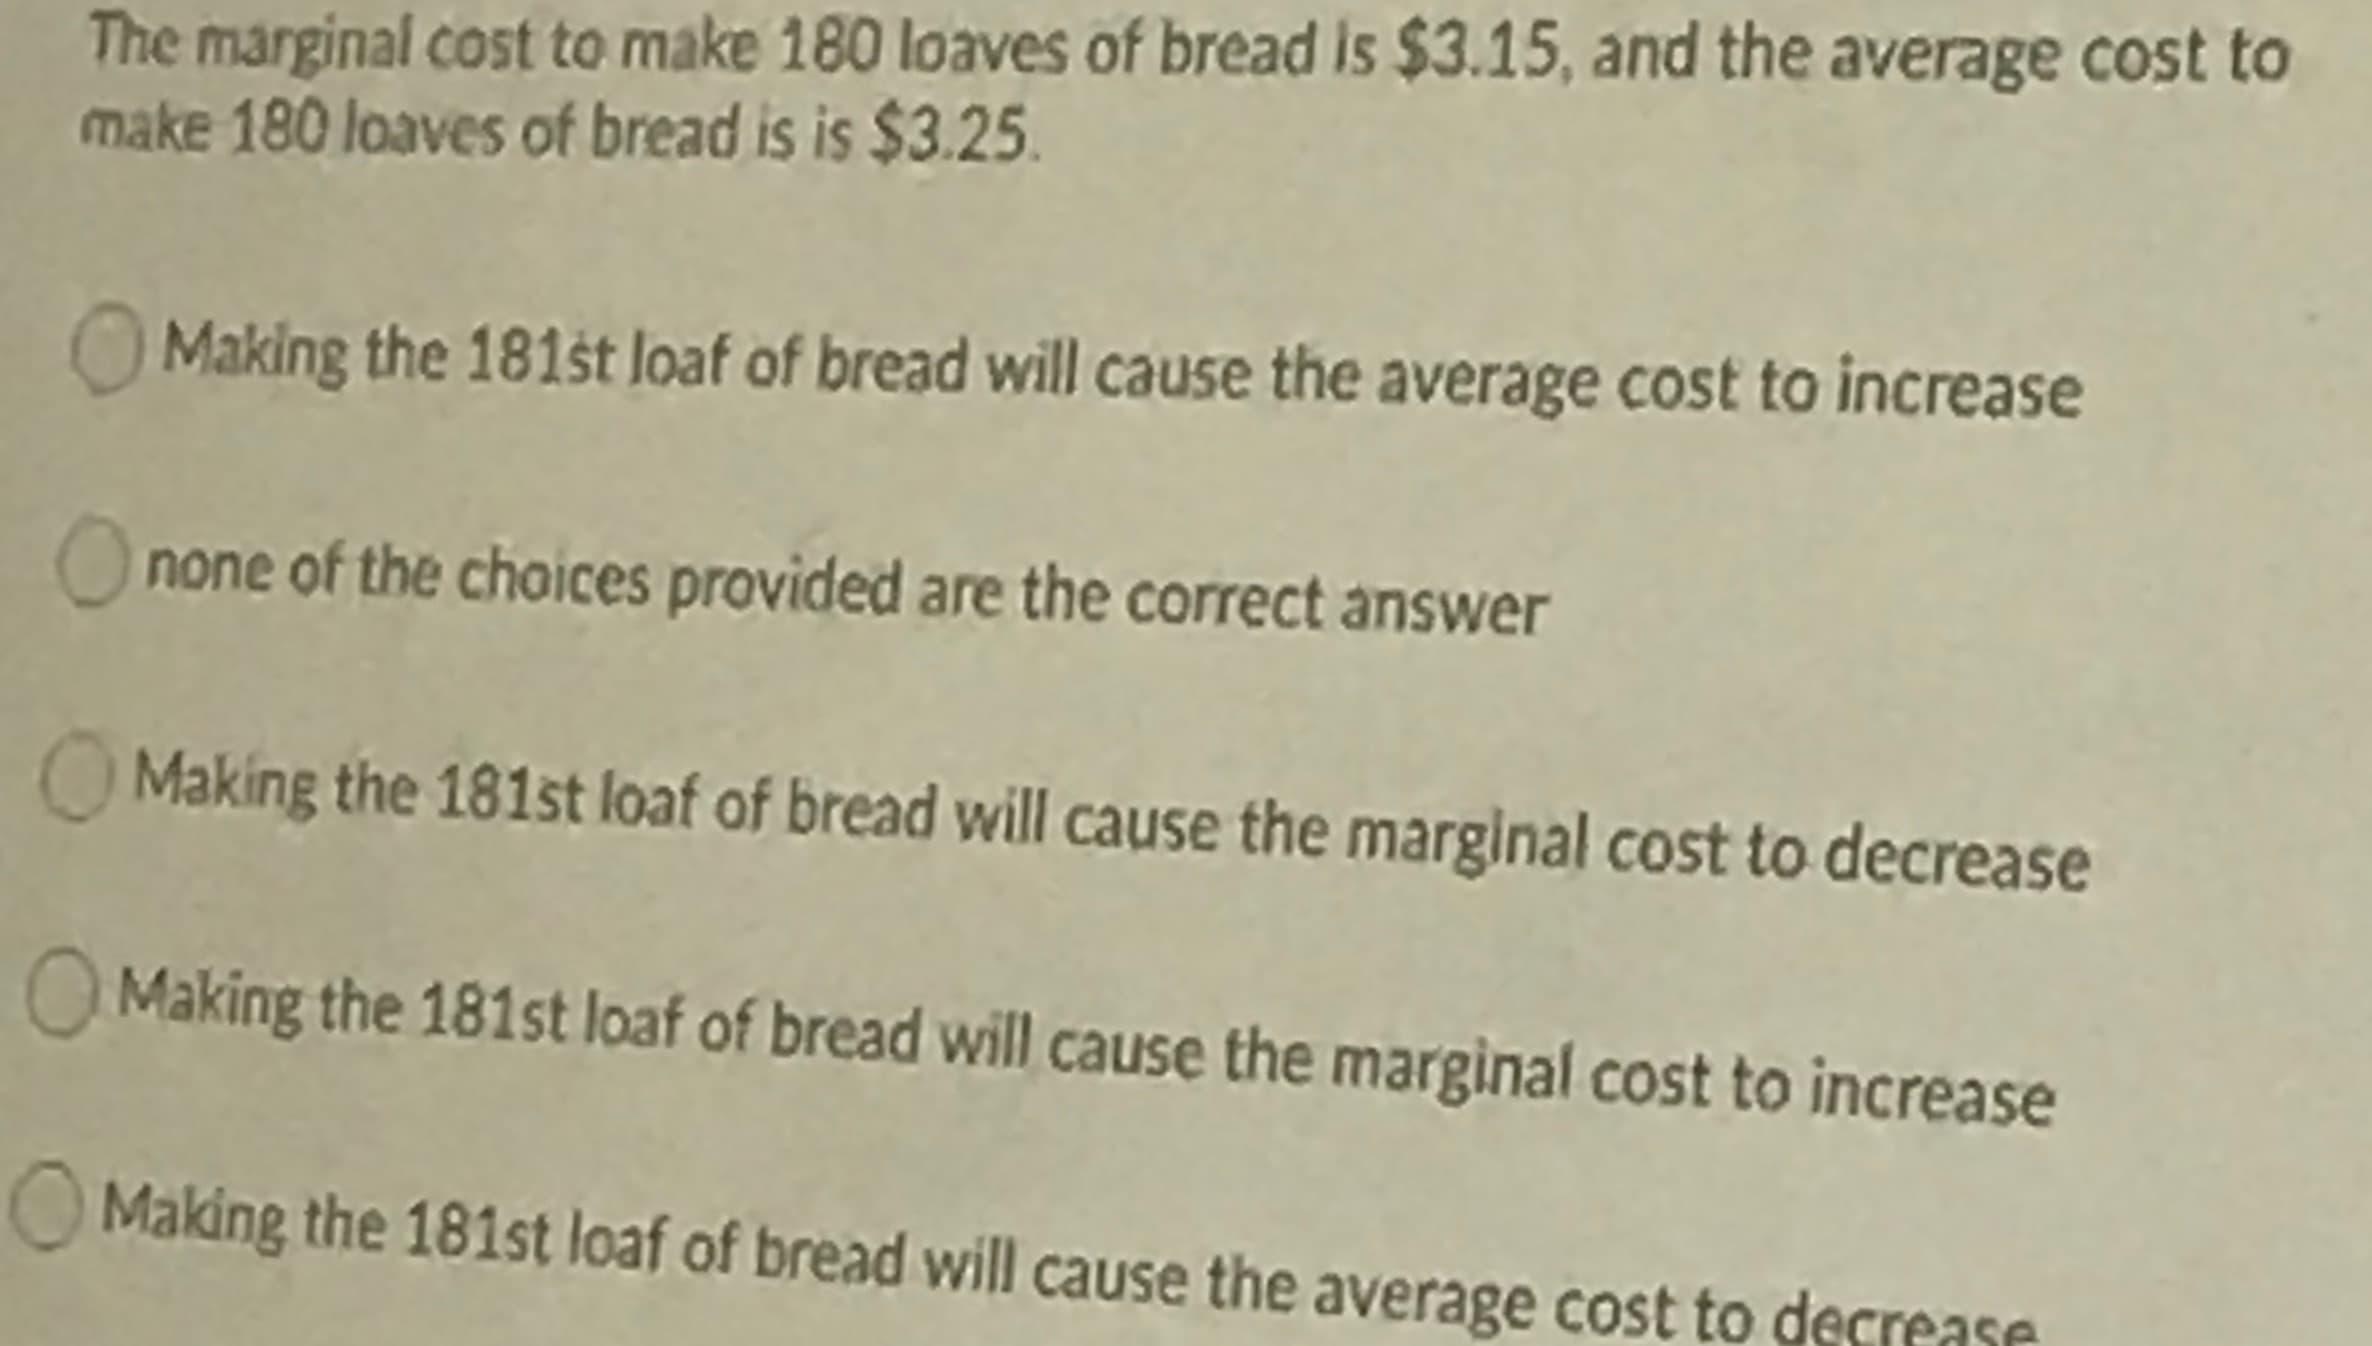 The marginal cost to make 180 loaves of bread is $3.15, and the average cost to
make 180 loaves of bread is is $3.25.
OMaking the 181št loaf of bread will cause the average cost to increase
none of the choices provided are the correct answer
Making the 181st loaf of bread will cause the marginal cost to decrease
Making the 181st loaf of bread will cause the marginal cost to increase
OMaking the 181st loaf of bread will cause the average cost to derroaco
